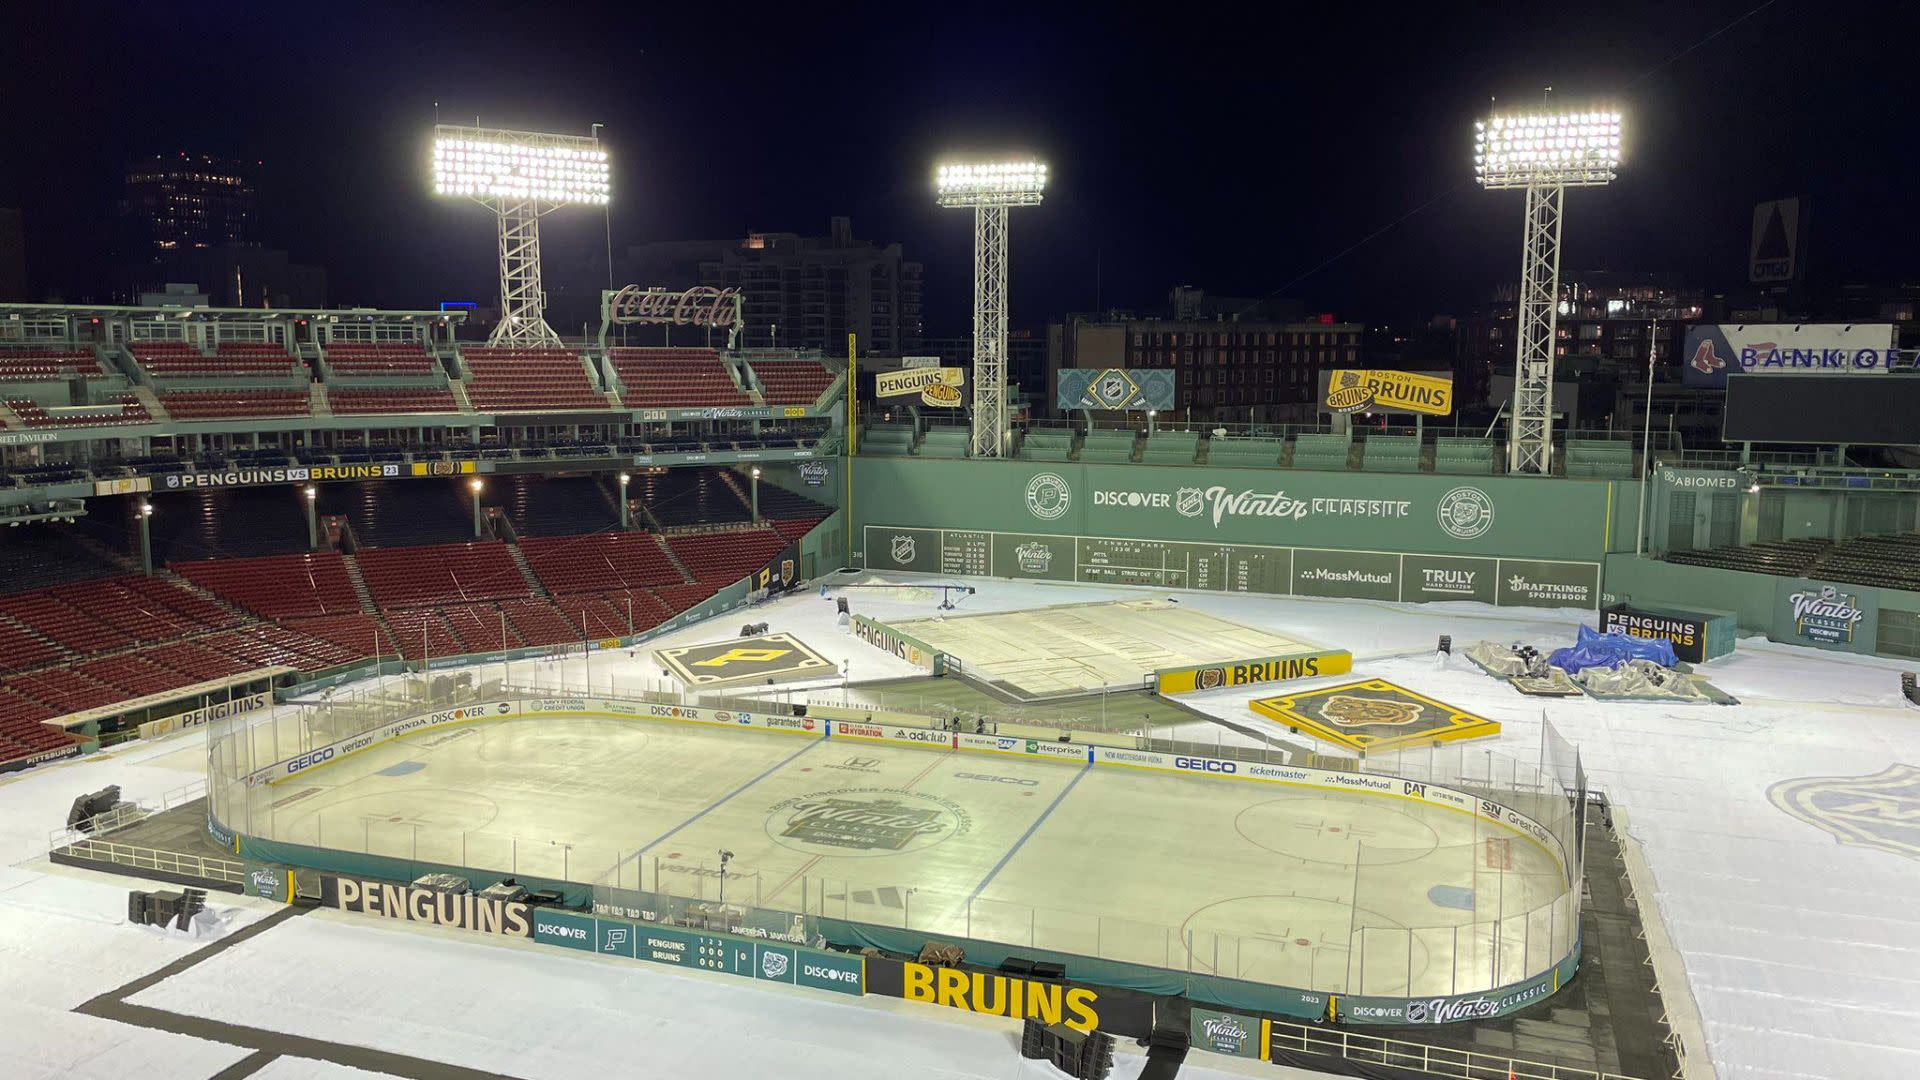 NHL's Winter Classic a hit at Fenway Park